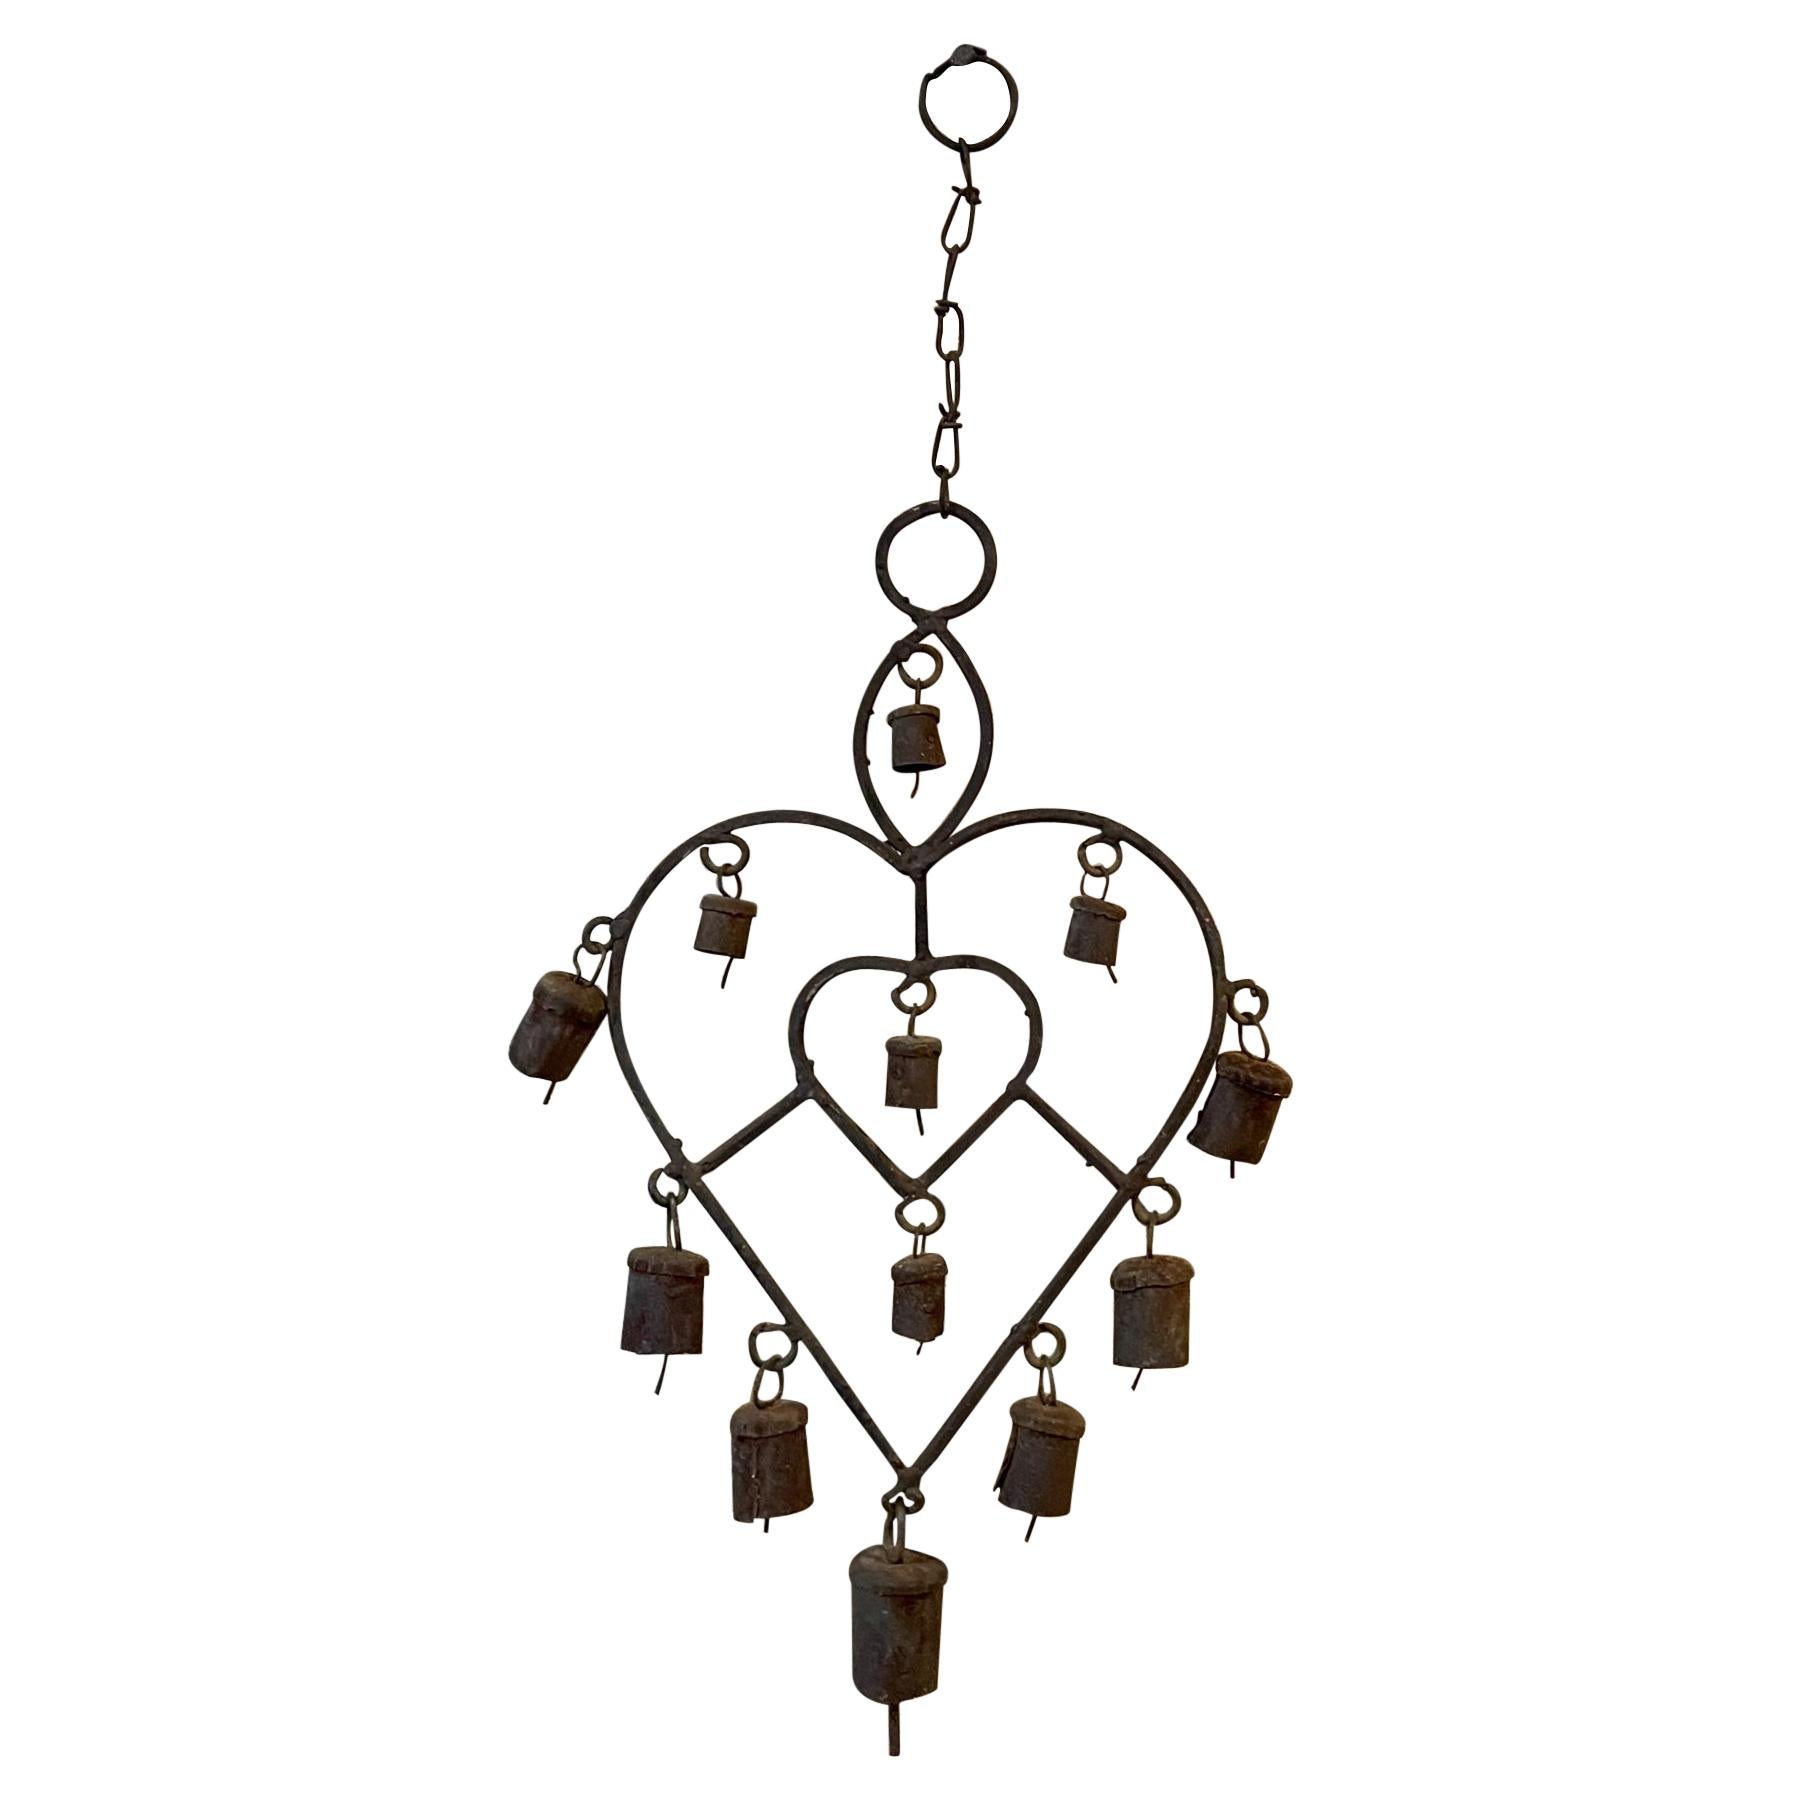  Antique Rustic Metal Heart Windchime with Bells Hanging Wall Art Mexico 1970s